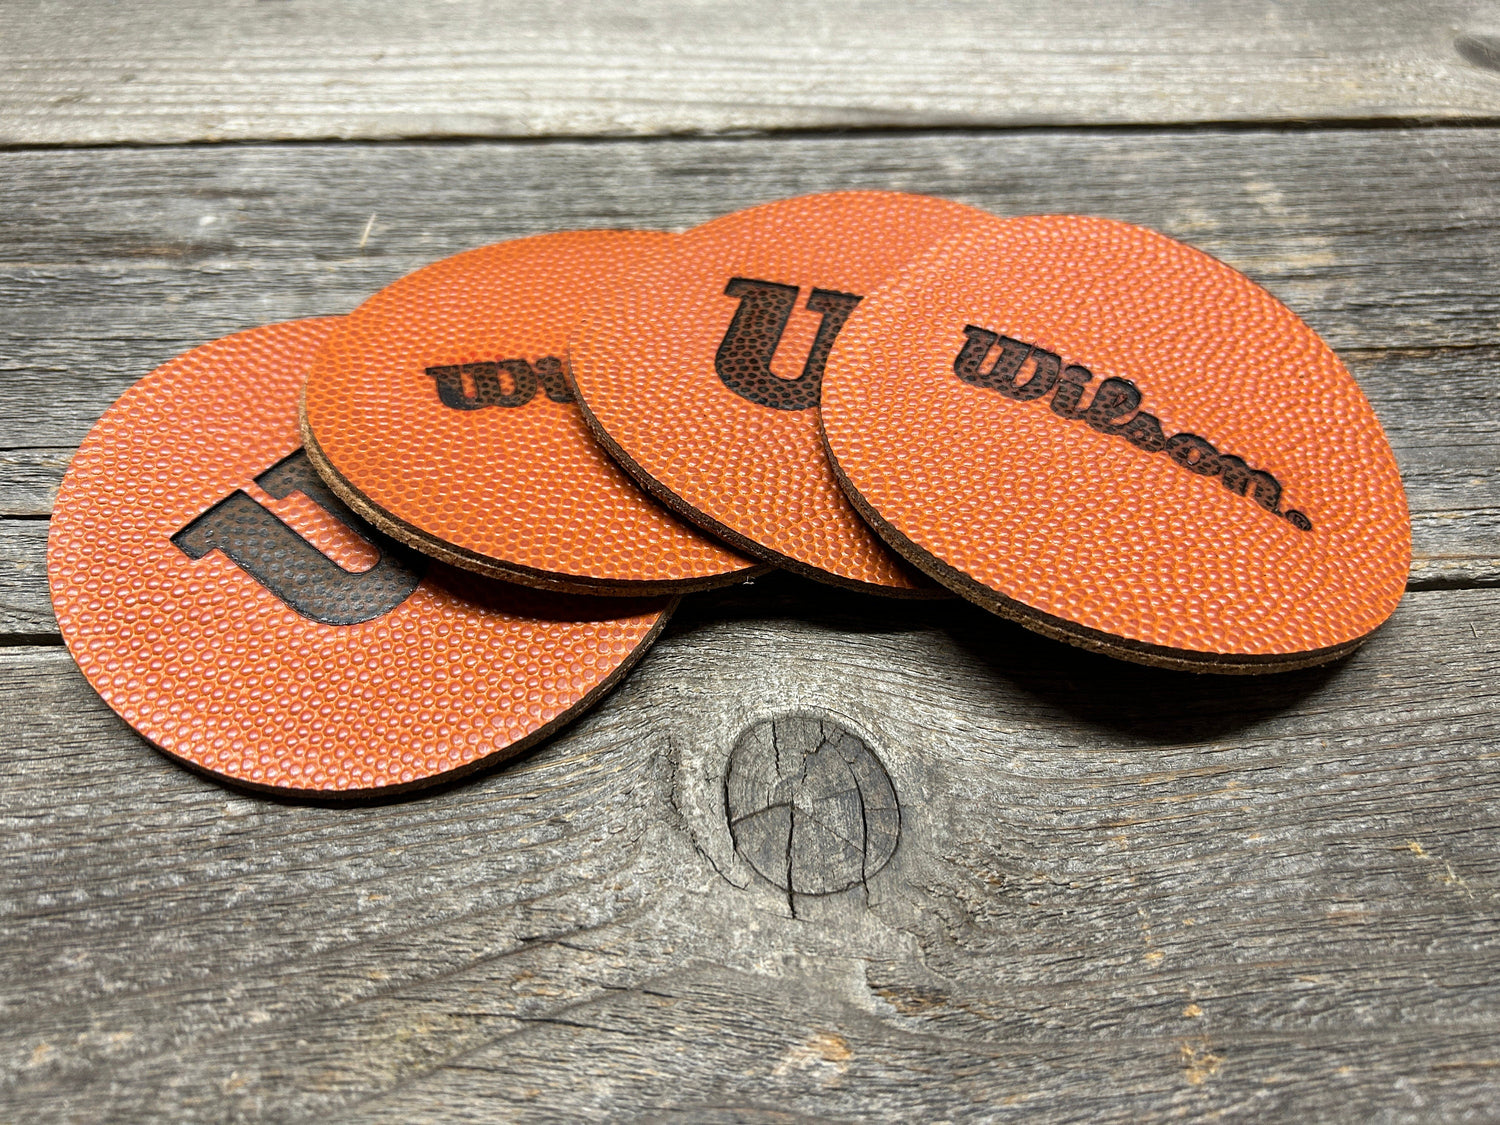 Set of 4 Coasters - WILSON/Horween NBA Leather - Official NBA Basketball Leather!!